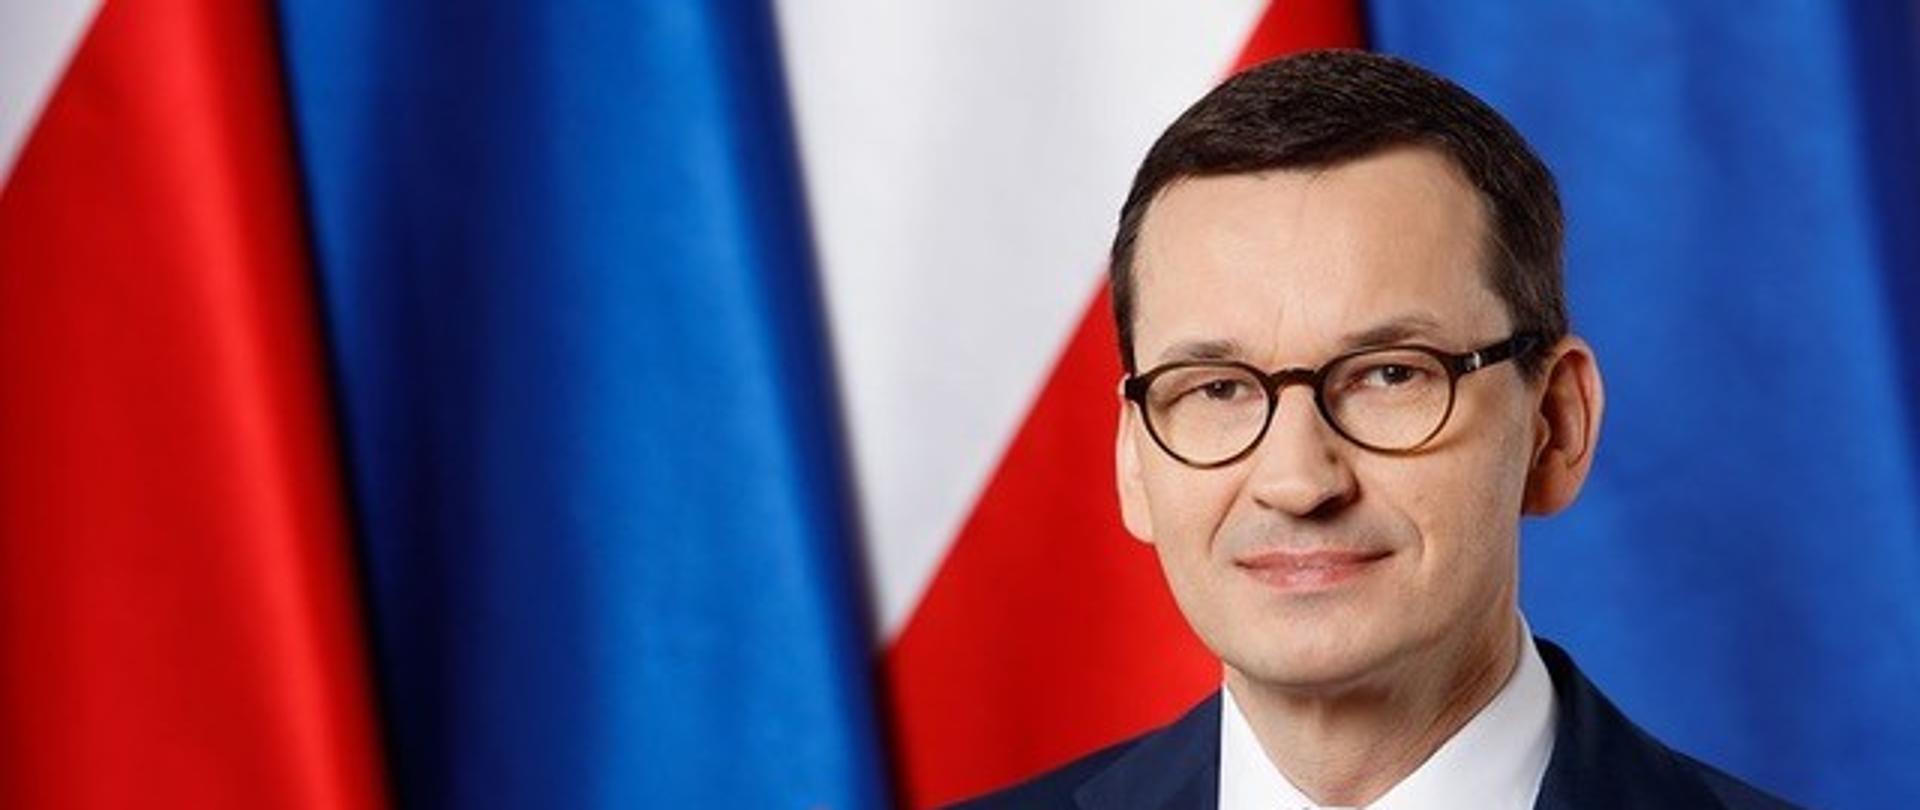 Prime Minister of the Republic of Poland